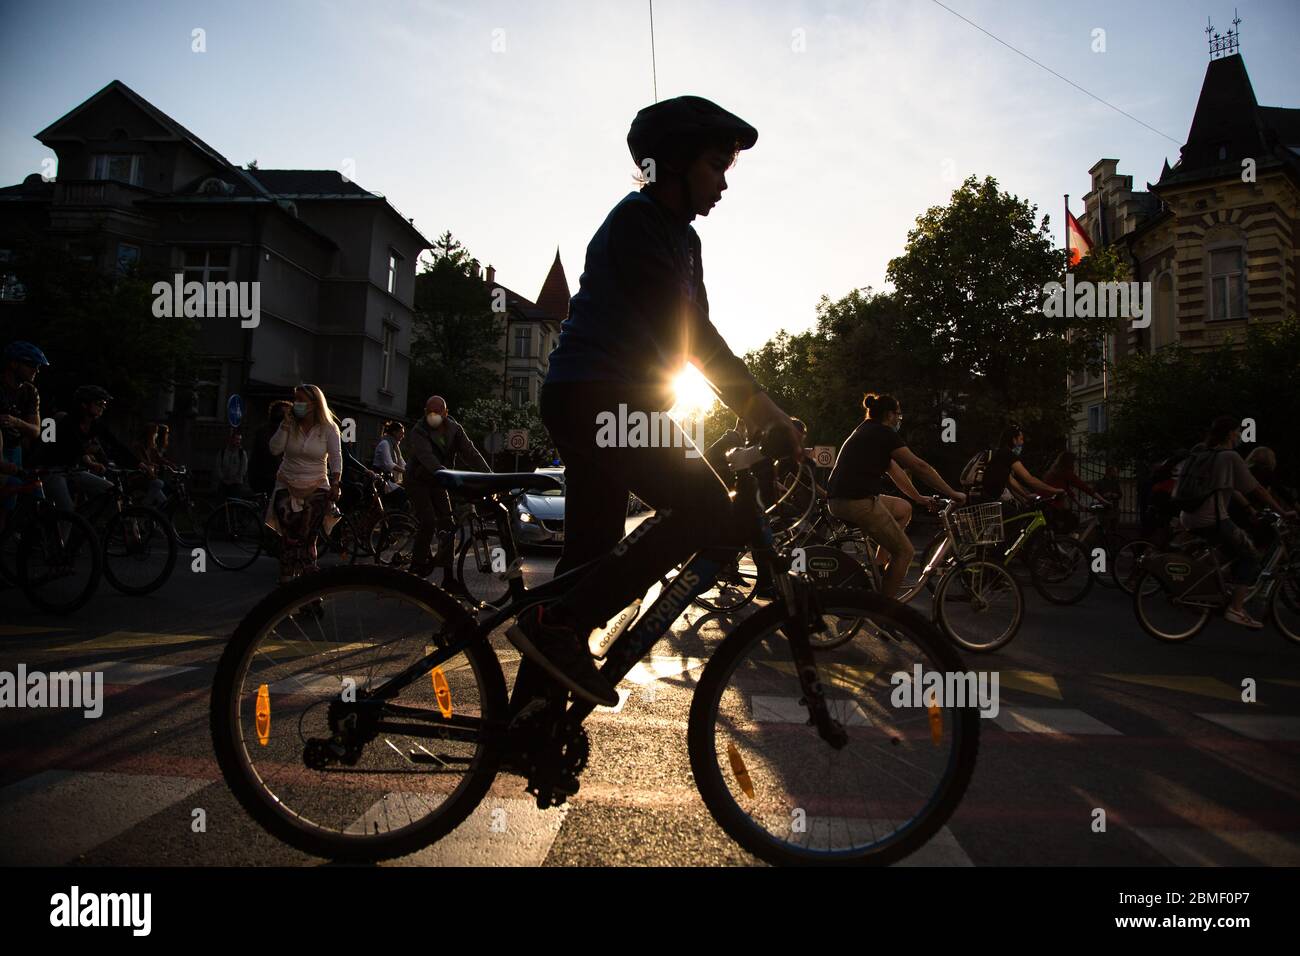 Ljubljana, Slovenia, May 8, 2020: A boy rides his bicycle  during an anti-government protest amid the coronavirus crisis. Following whistleblower's revelations of corruption in the government of Janez Janša and accusations of its undemocratic rule over five thousand people rode bicycles around government buildings in sign of protest. Stock Photo